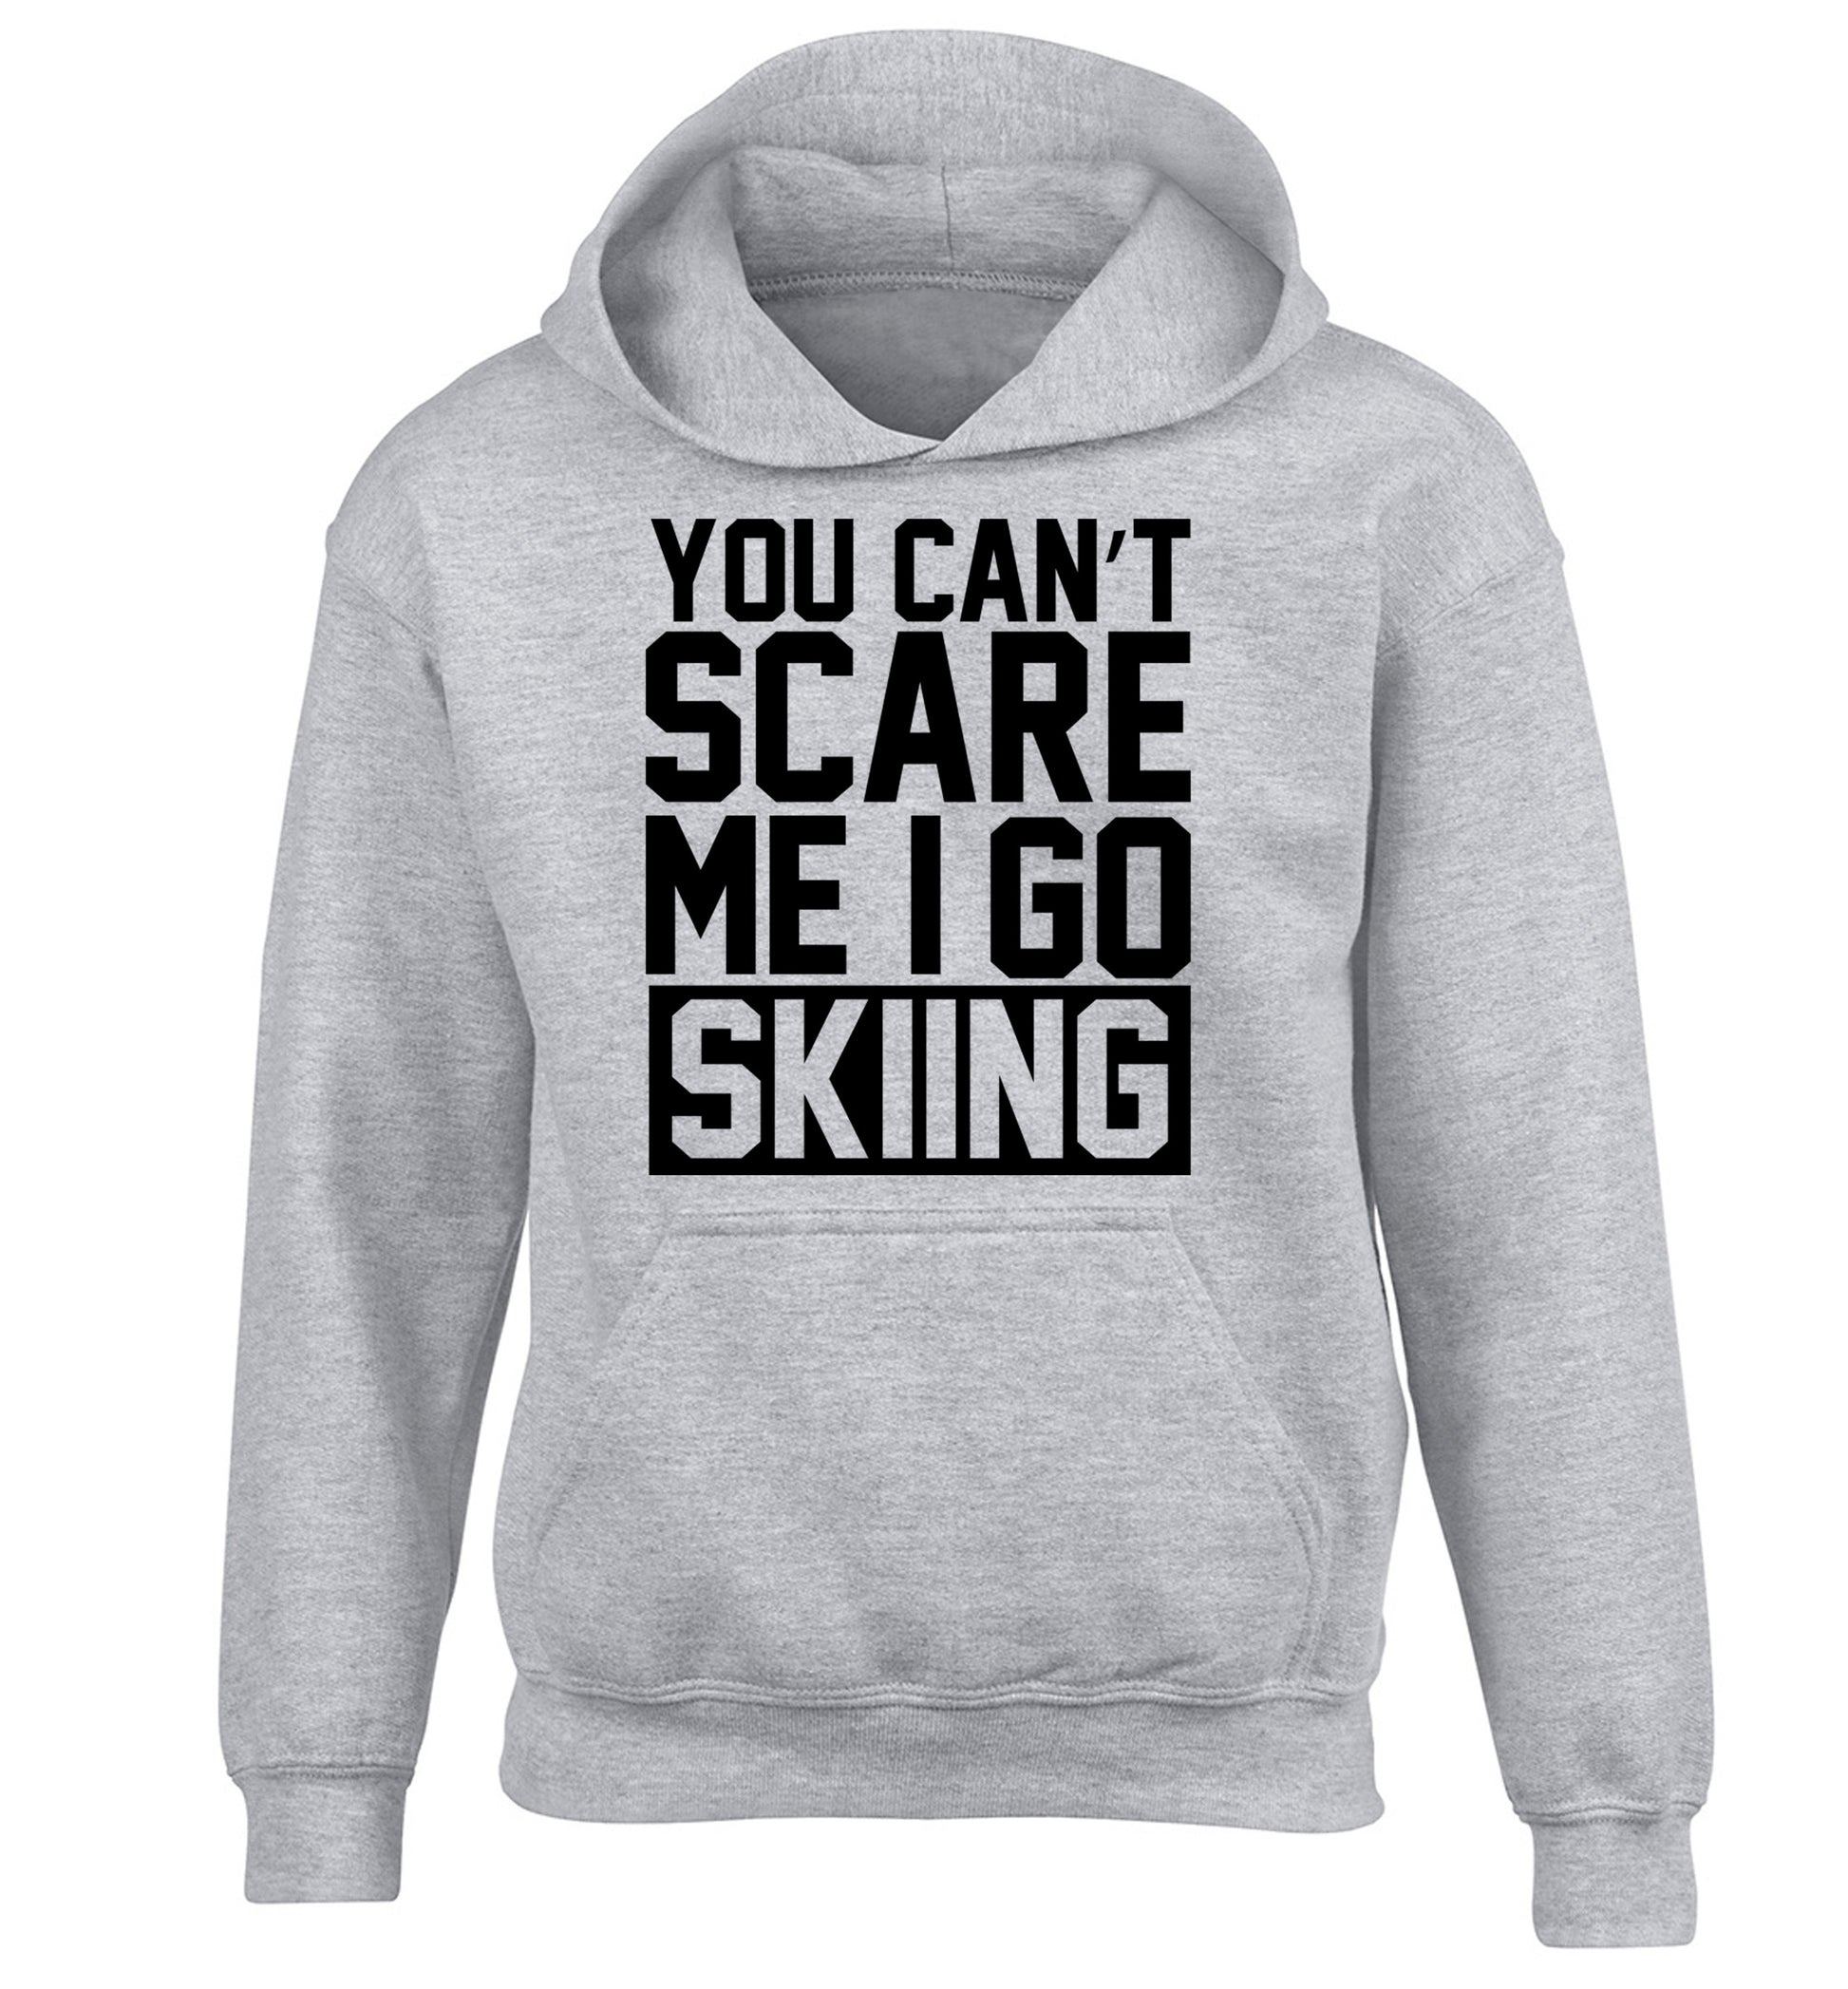 You can't scare me I go skiing children's grey hoodie 12-14 Years